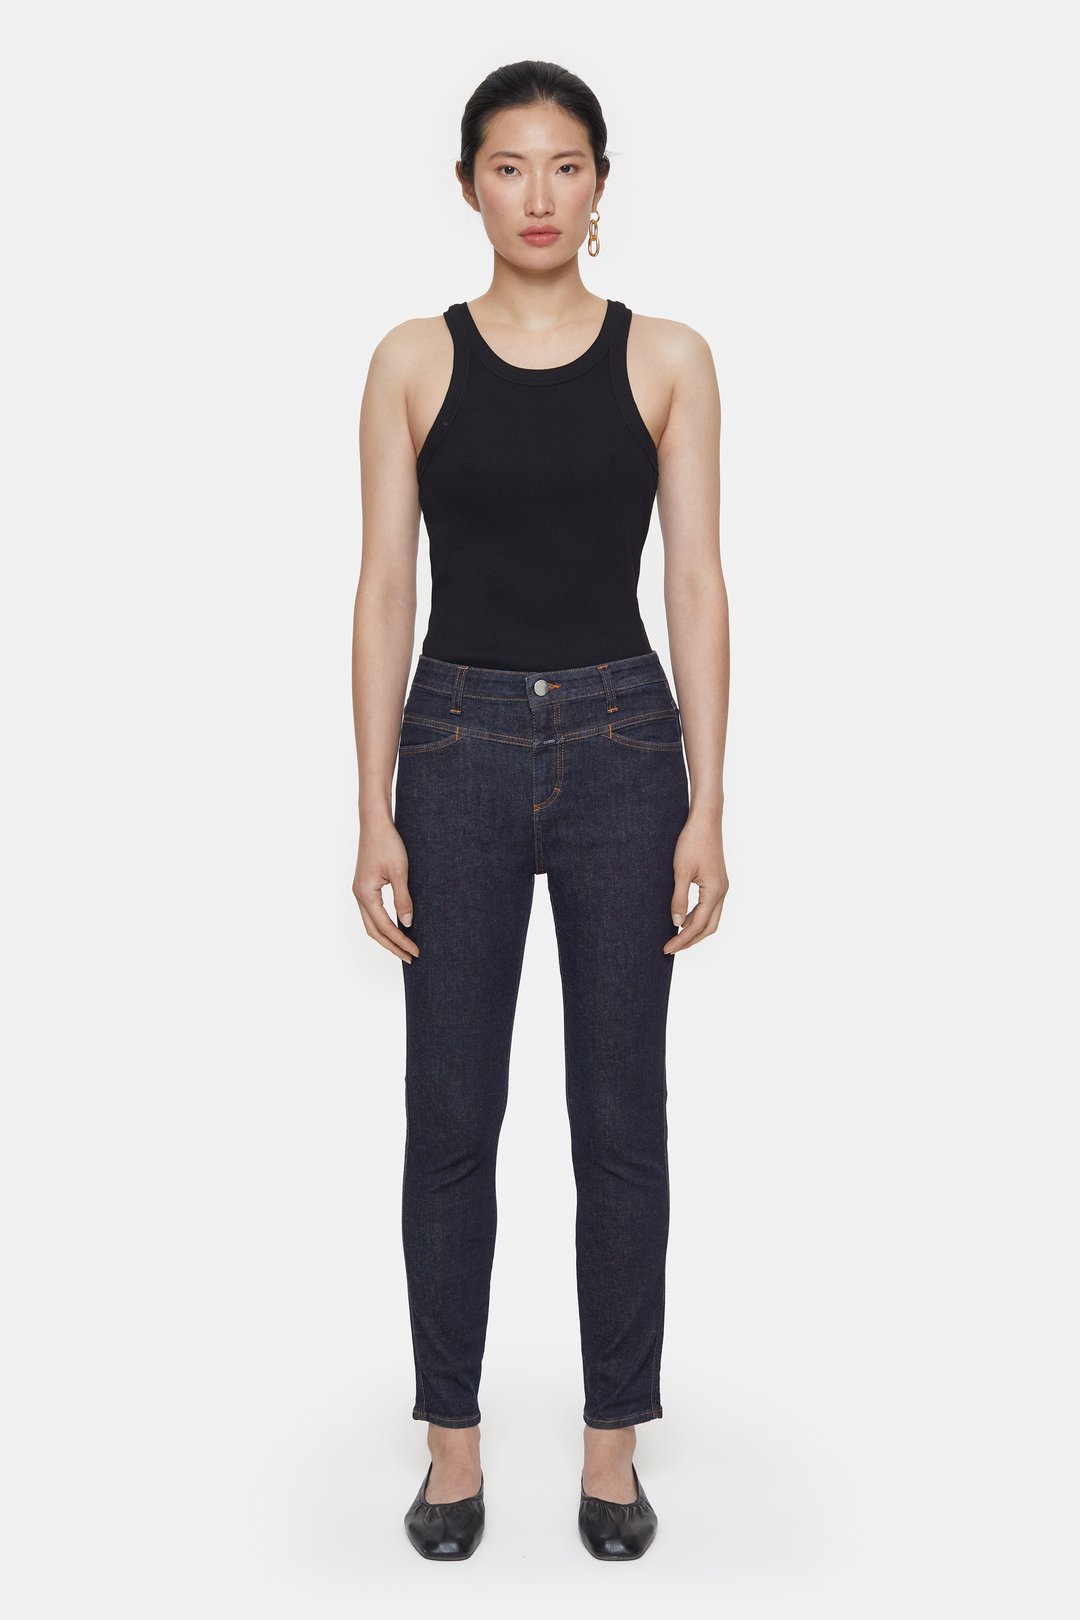 SKINNY JEANS - STYLE NAME SKINNY PUSHER | CLOSED